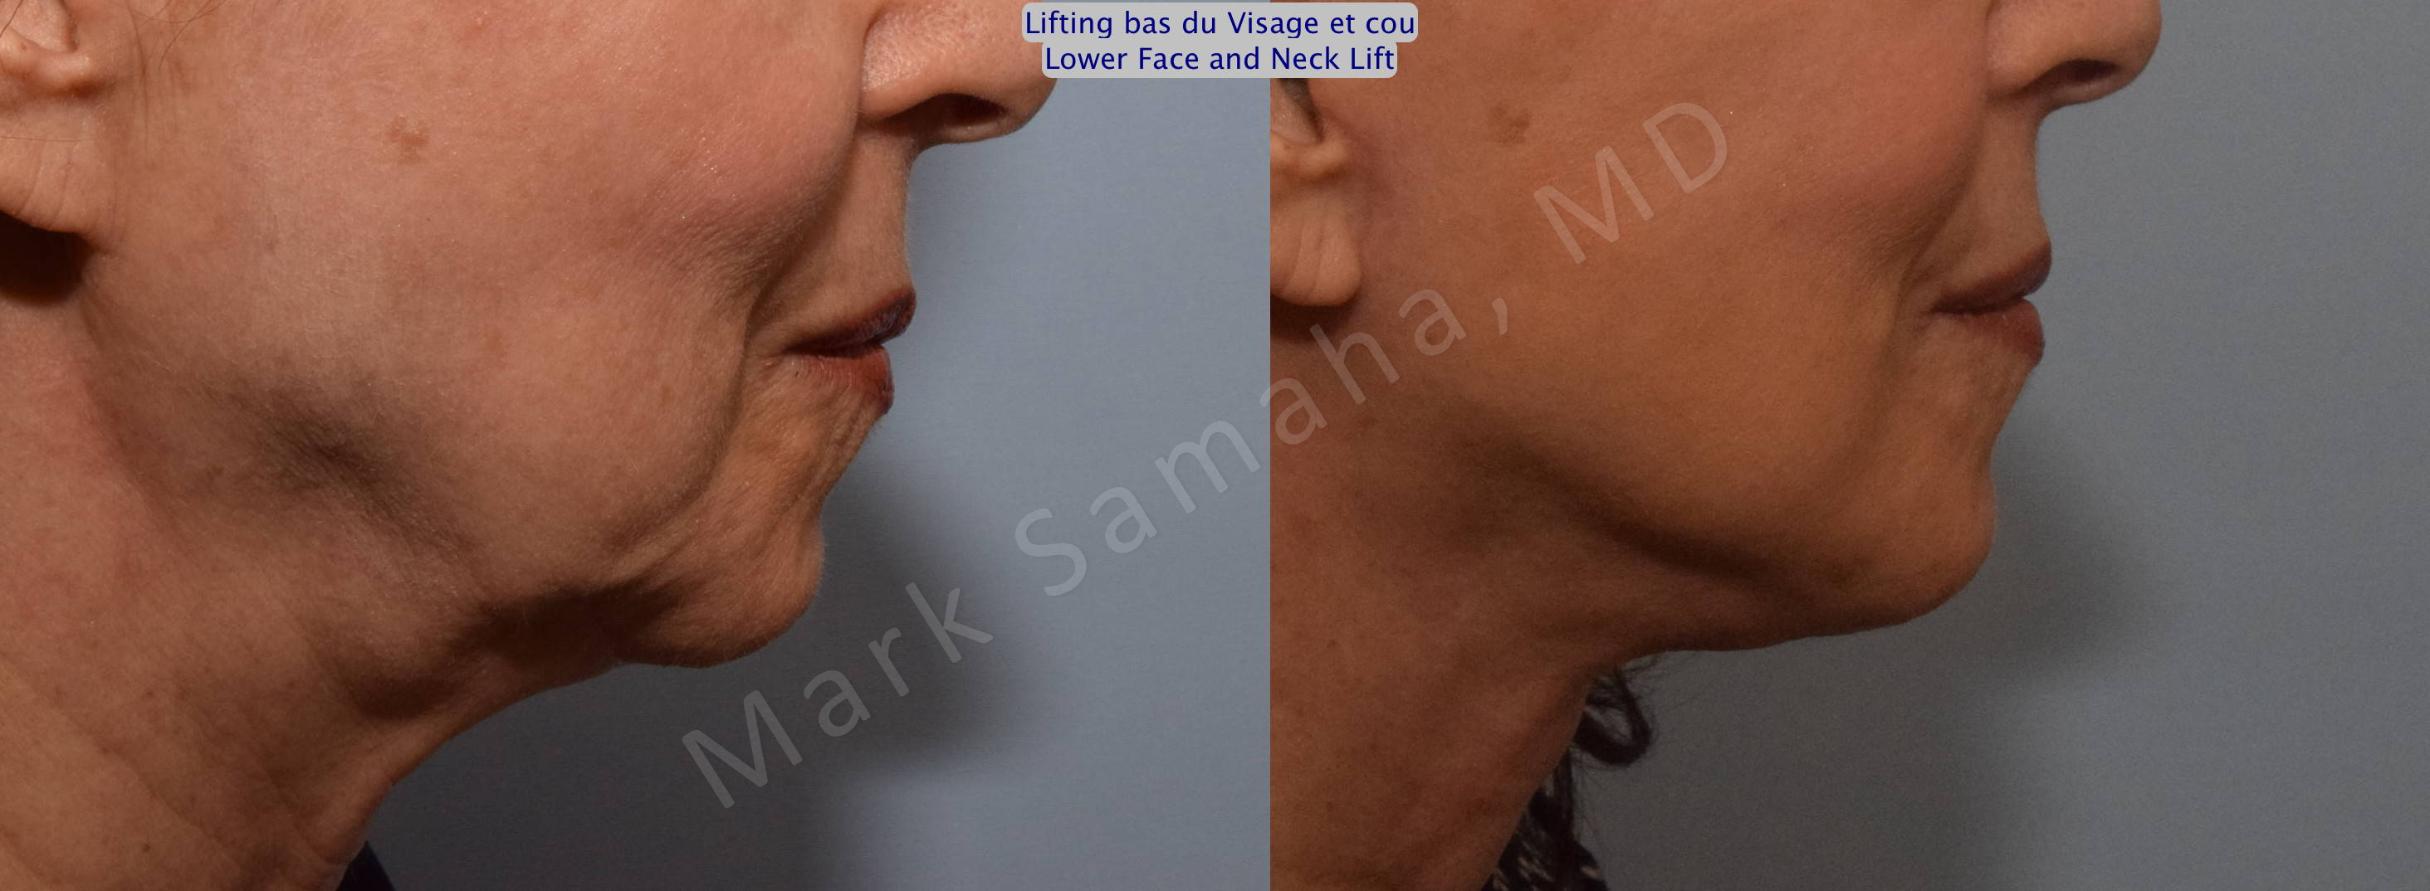 Before & After Facelift / Necklift - Lifting du visage / Cou Case 101 View #4 View in Mount Royal, QC